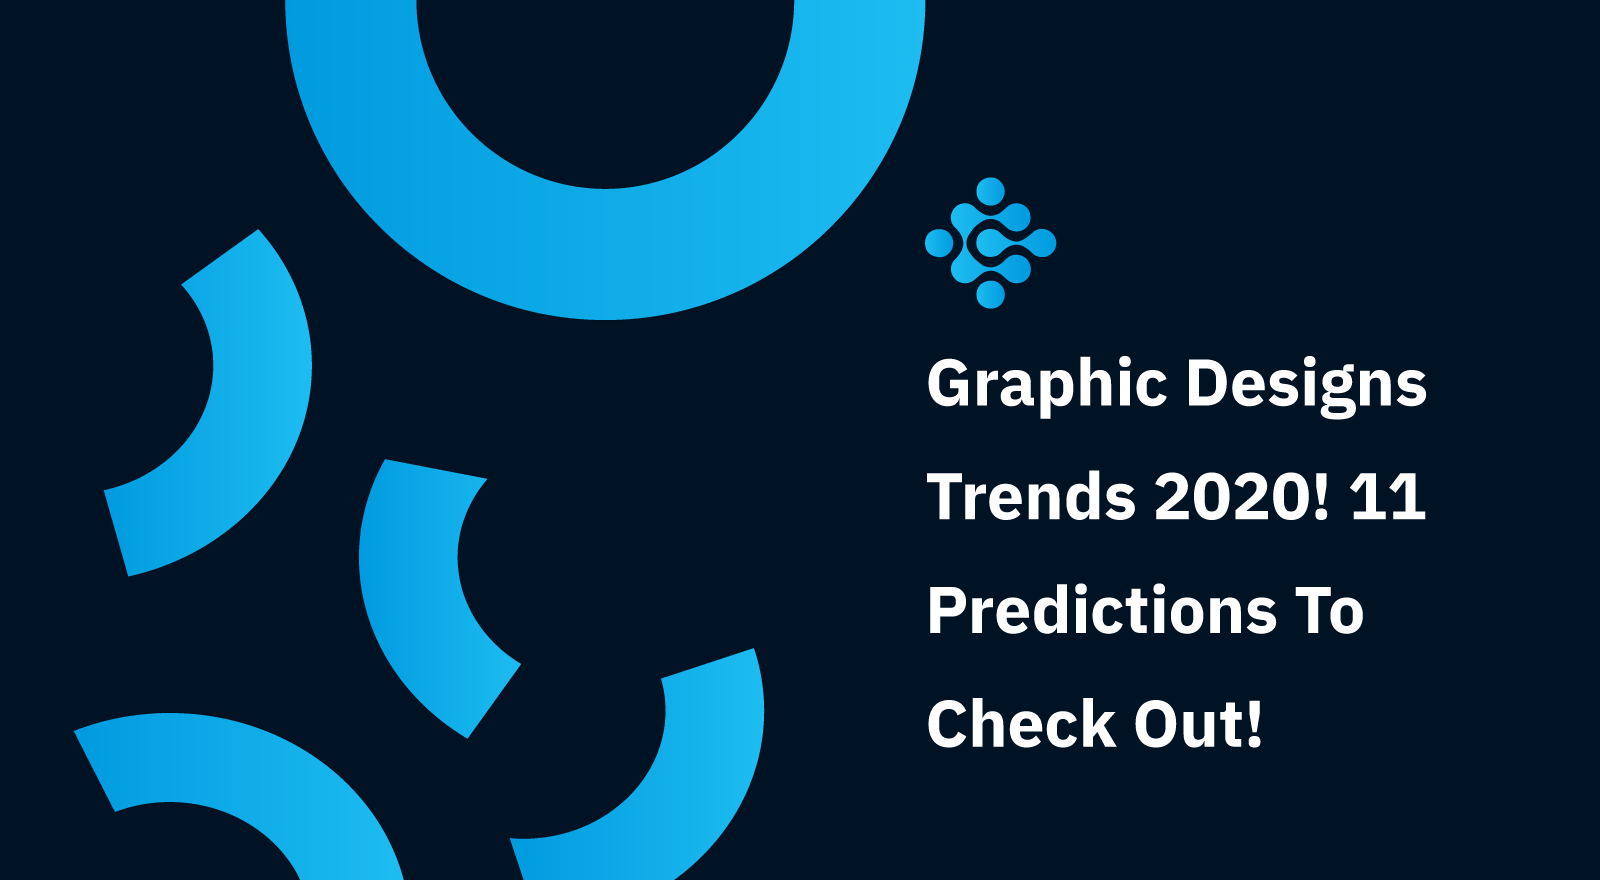 Graphic Designs Trends 2020! 11 Predictions To Check Out